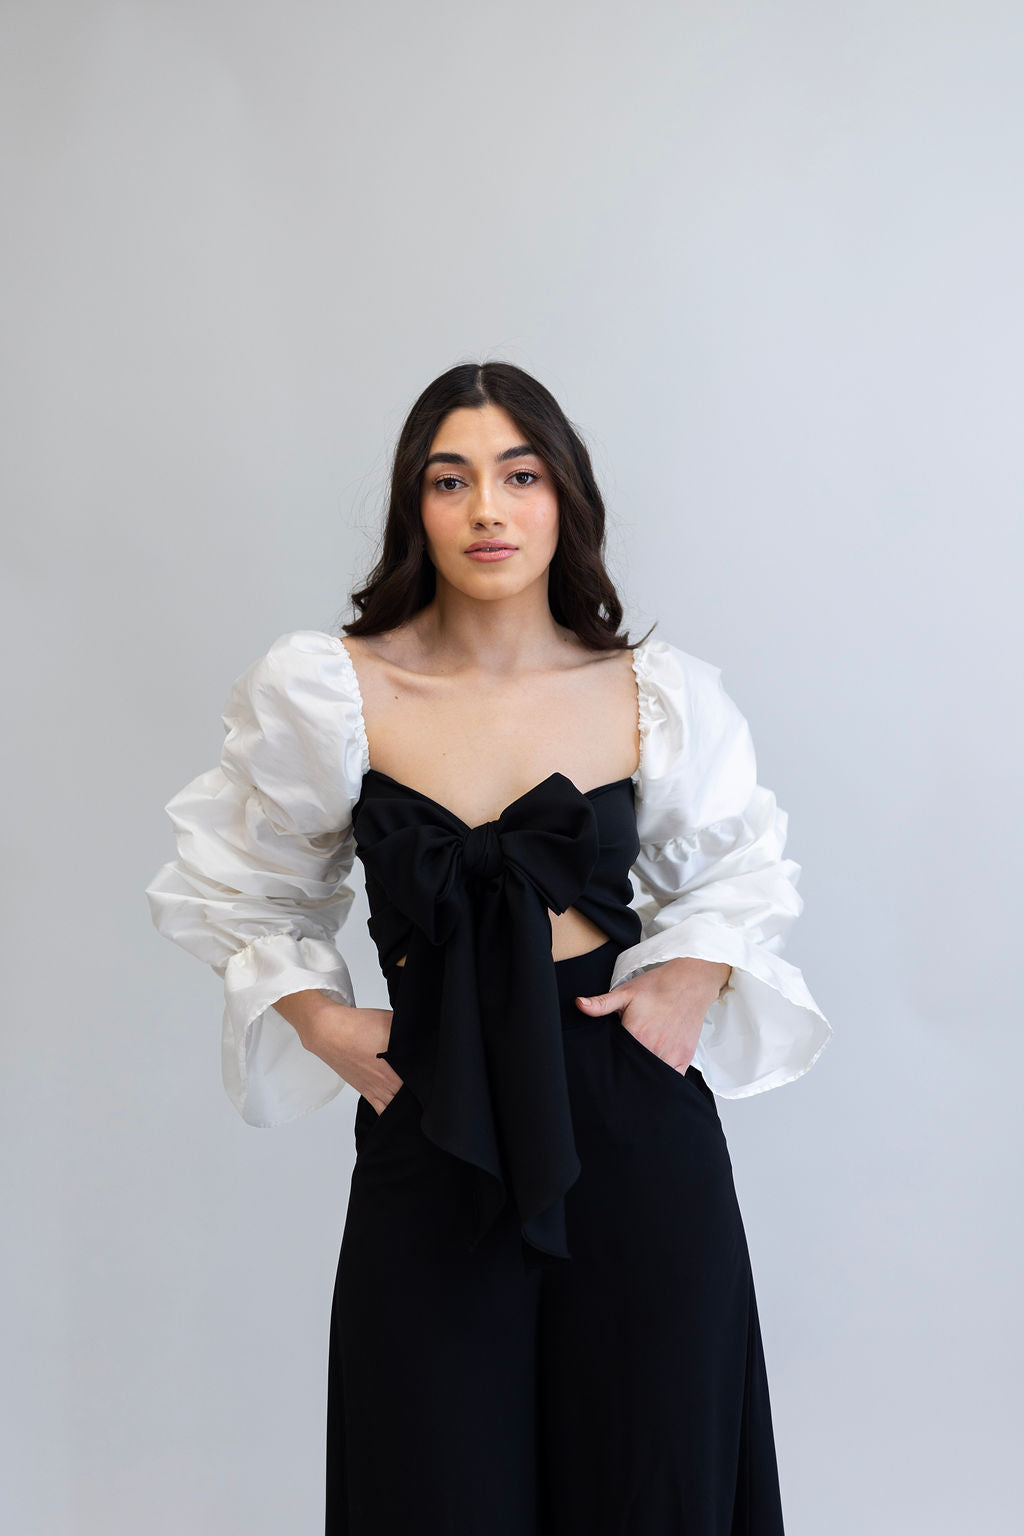 PUFFY SLEEVES TOP IN BLACK & WHITE